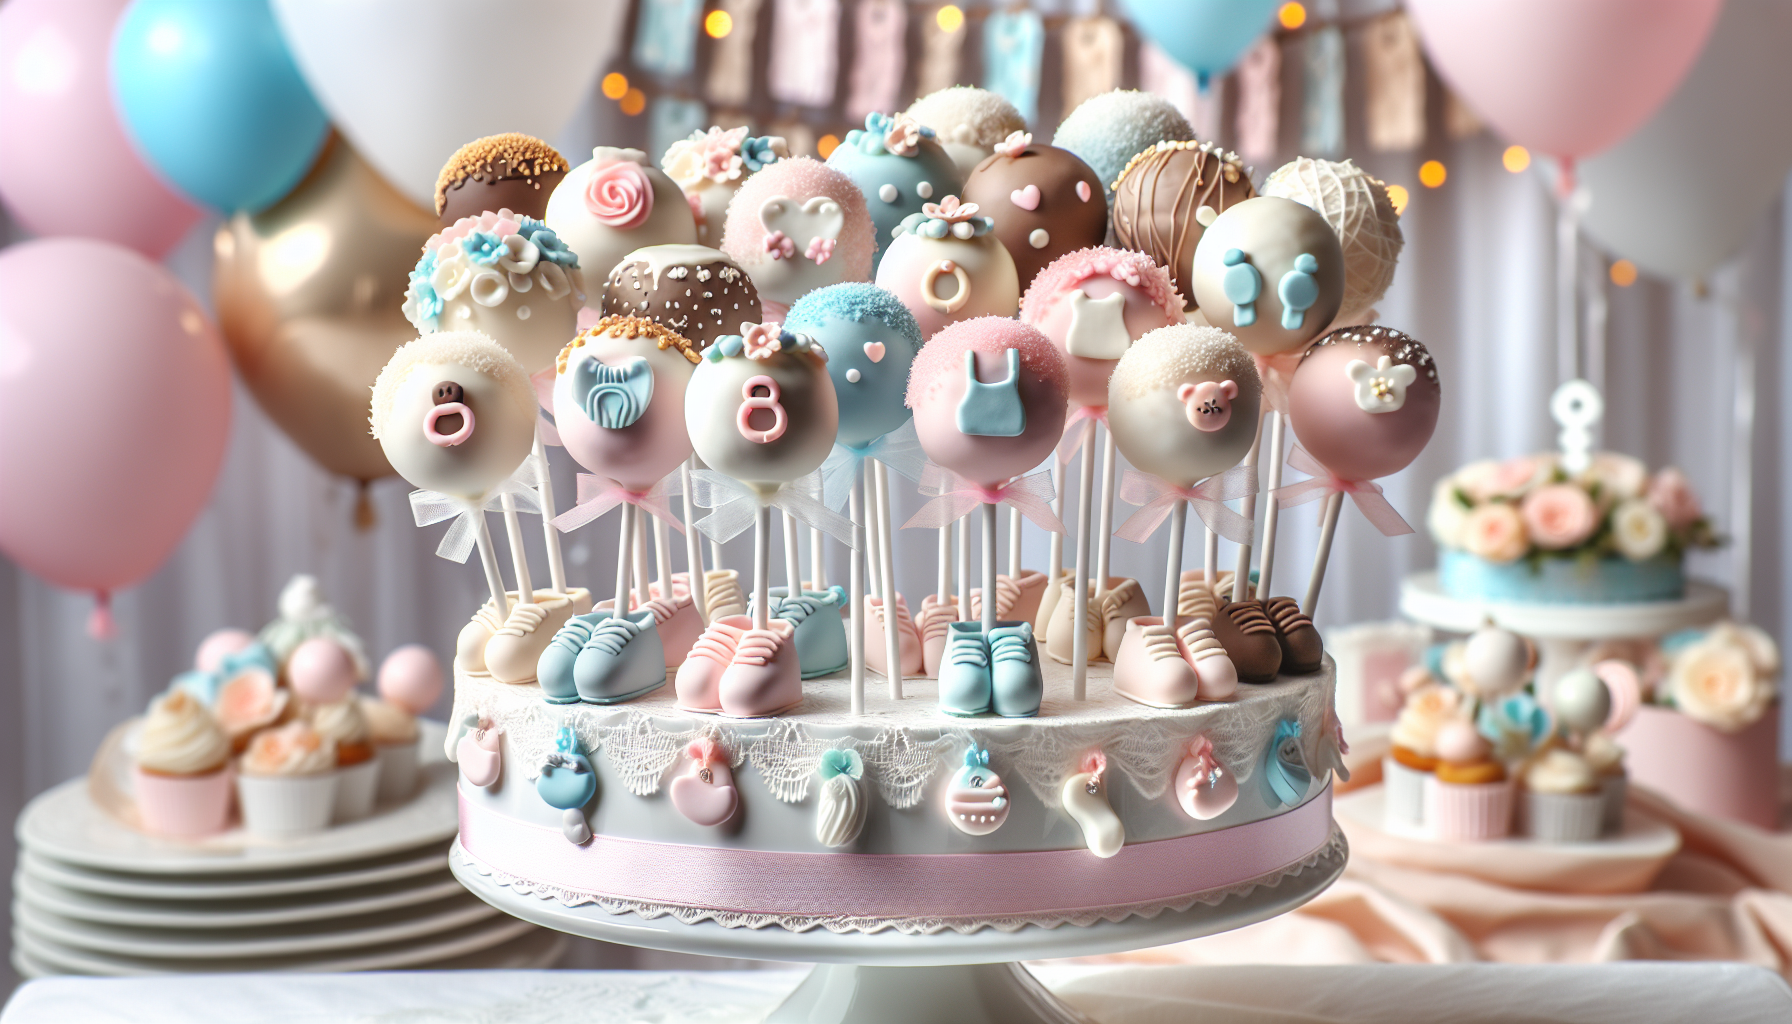 Themed cake pops for a baby shower